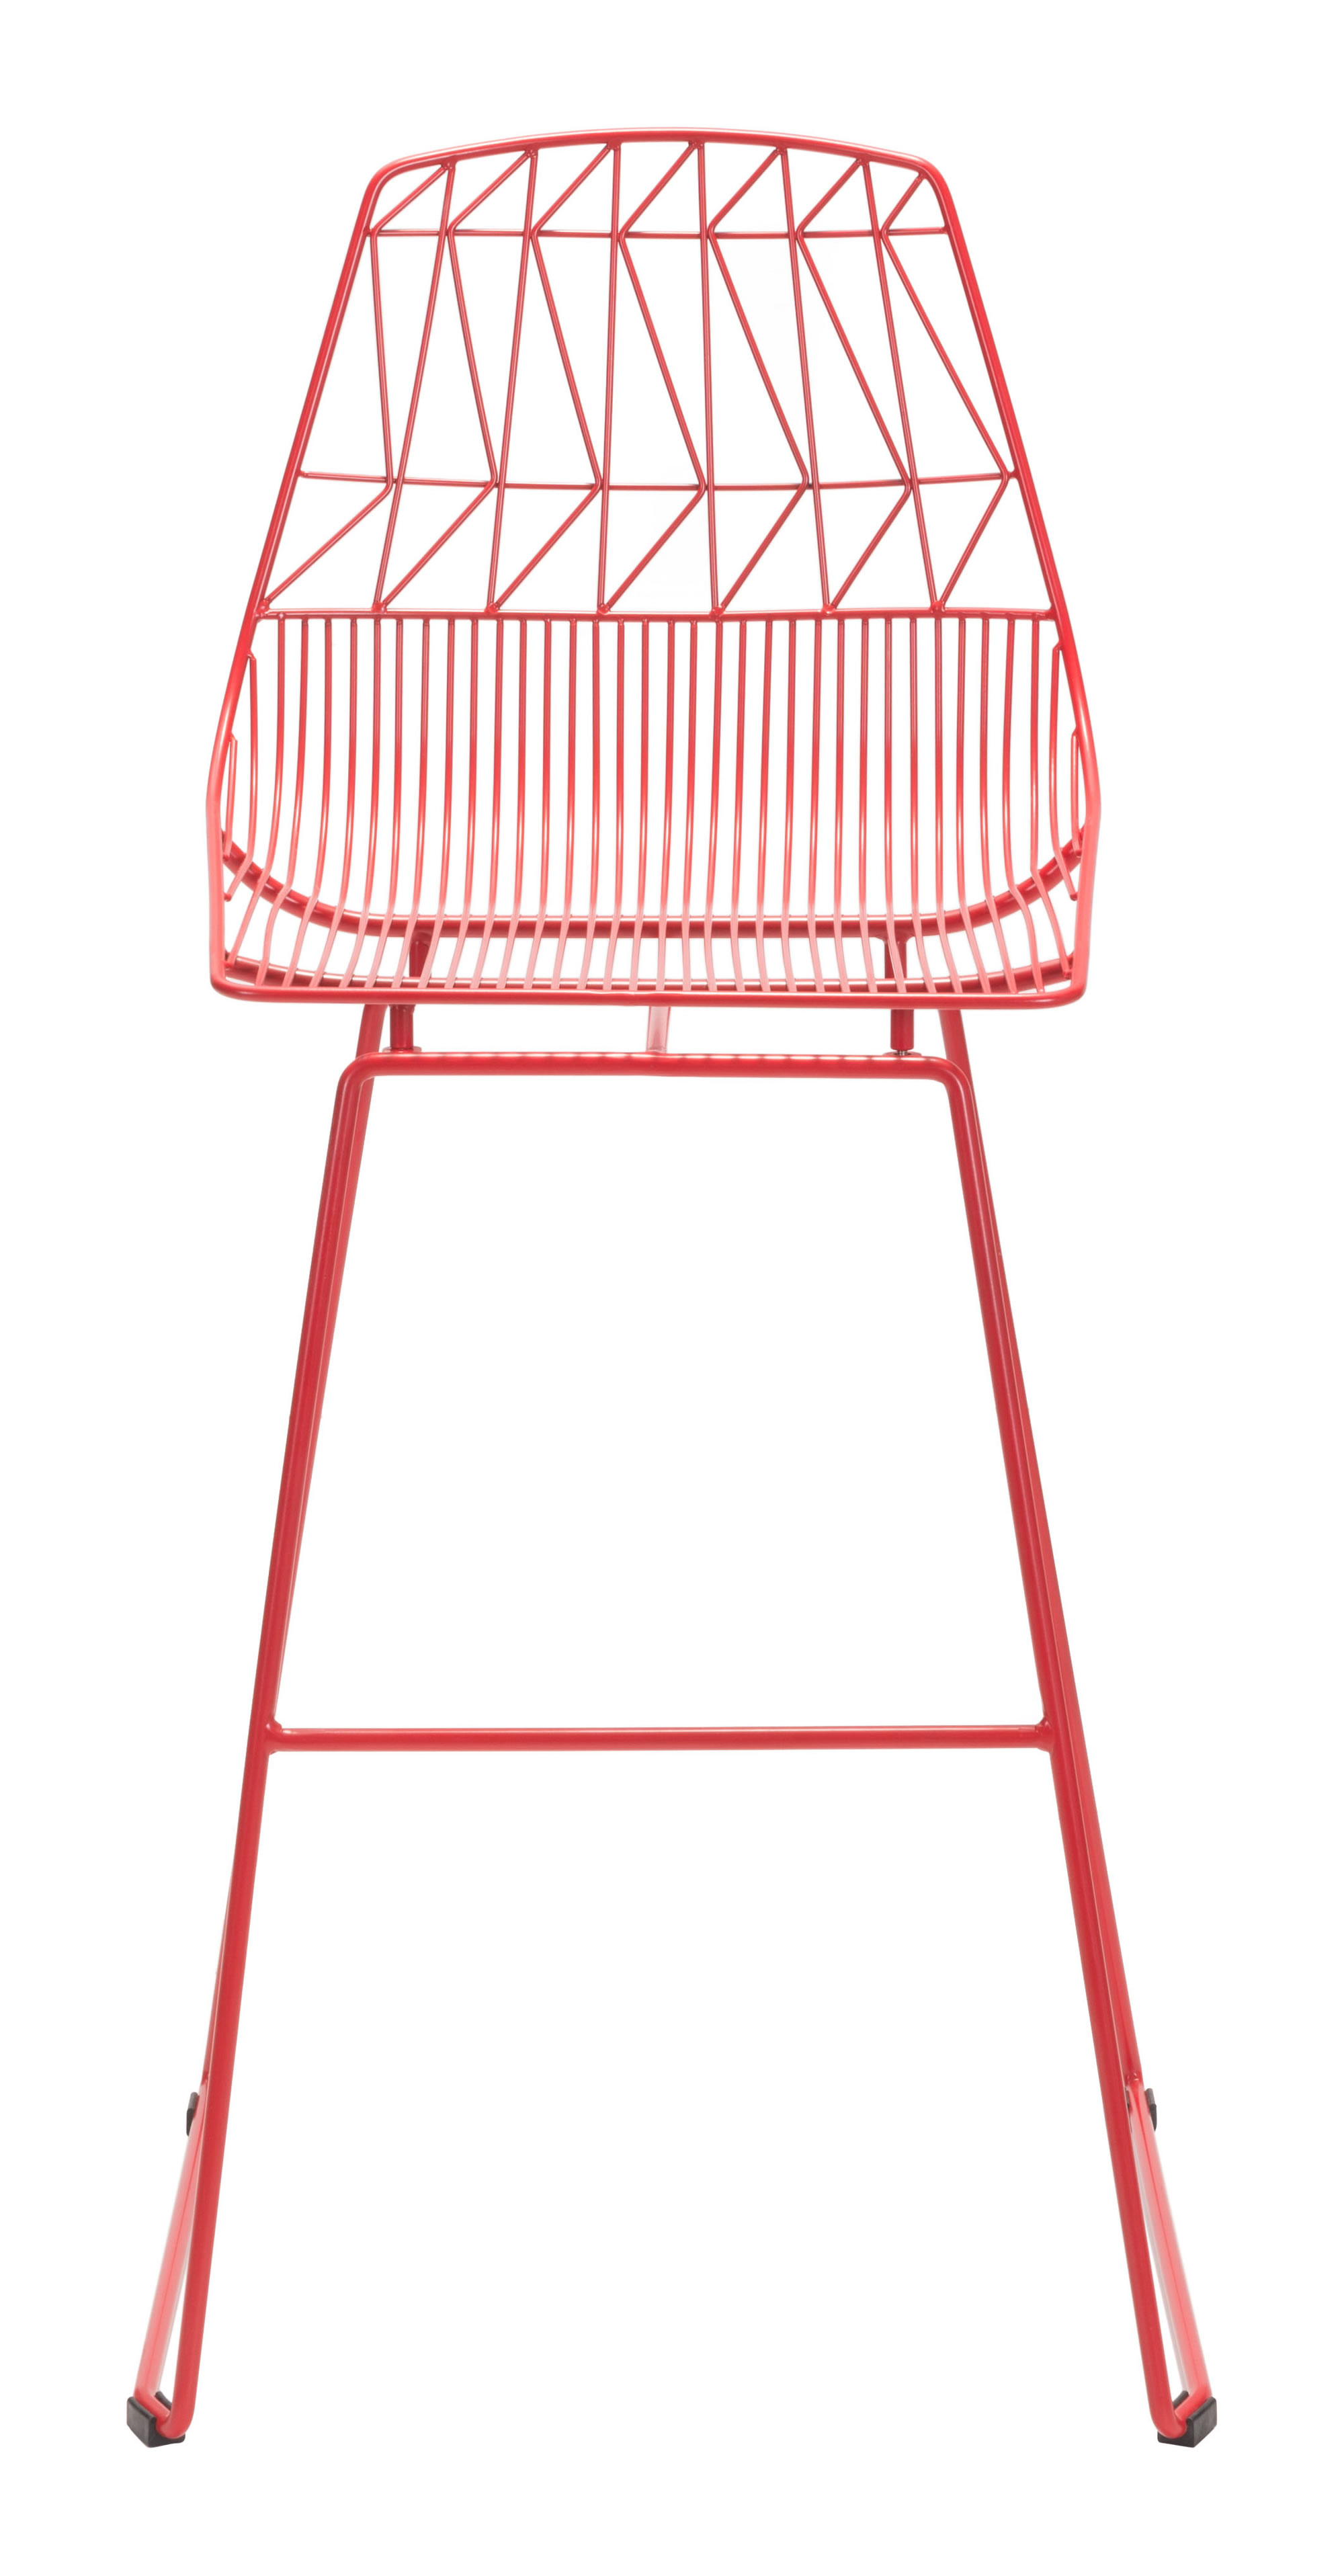 22" x 22" x 43.5" Red, Steel, Bar Chair - Set of 2